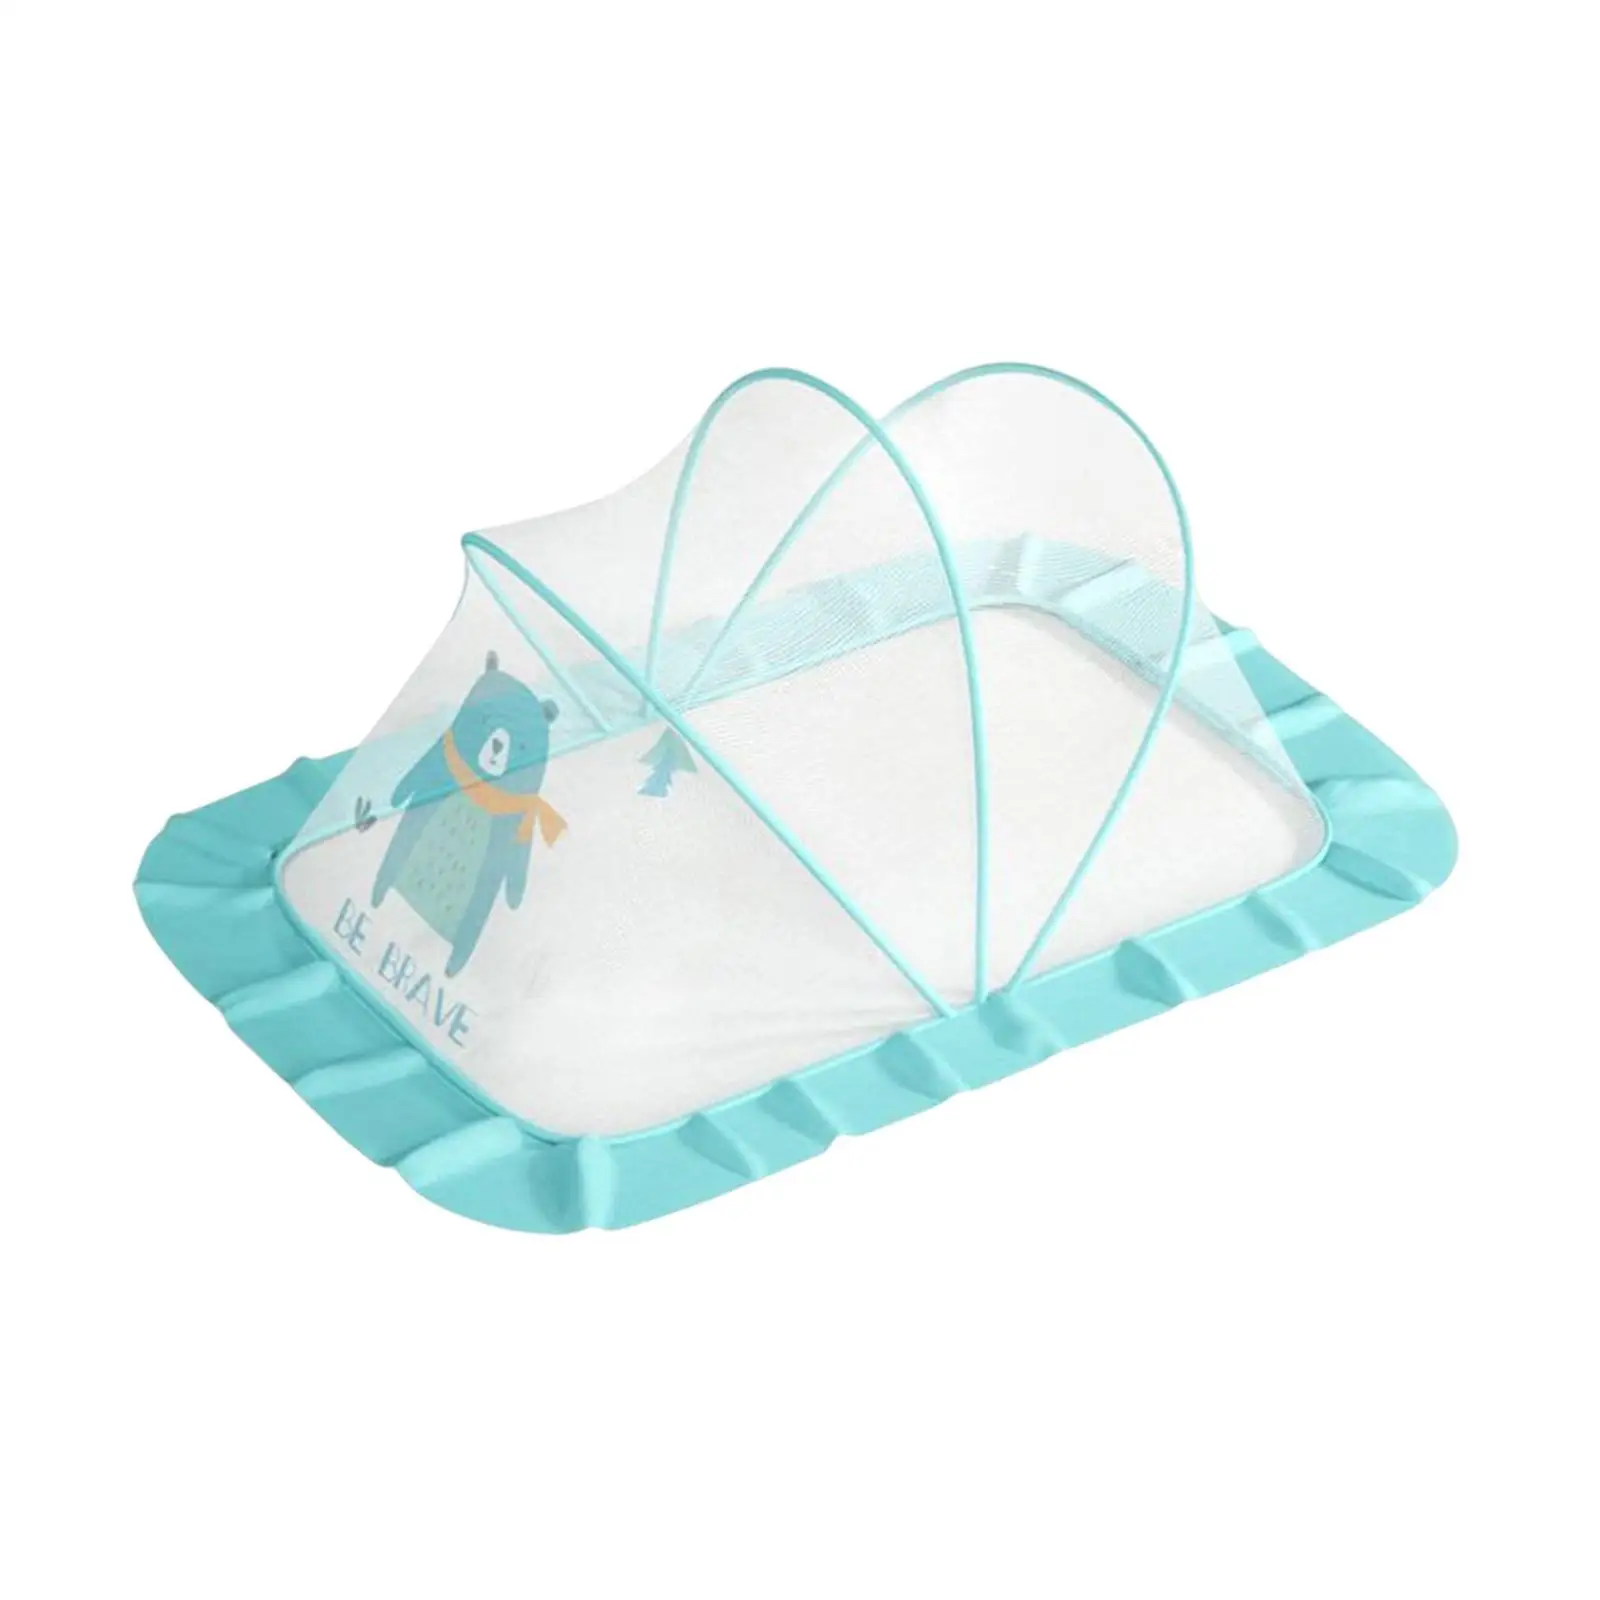 Portable Baby Cots Net, High Density Grids , Foldable for Toddlers